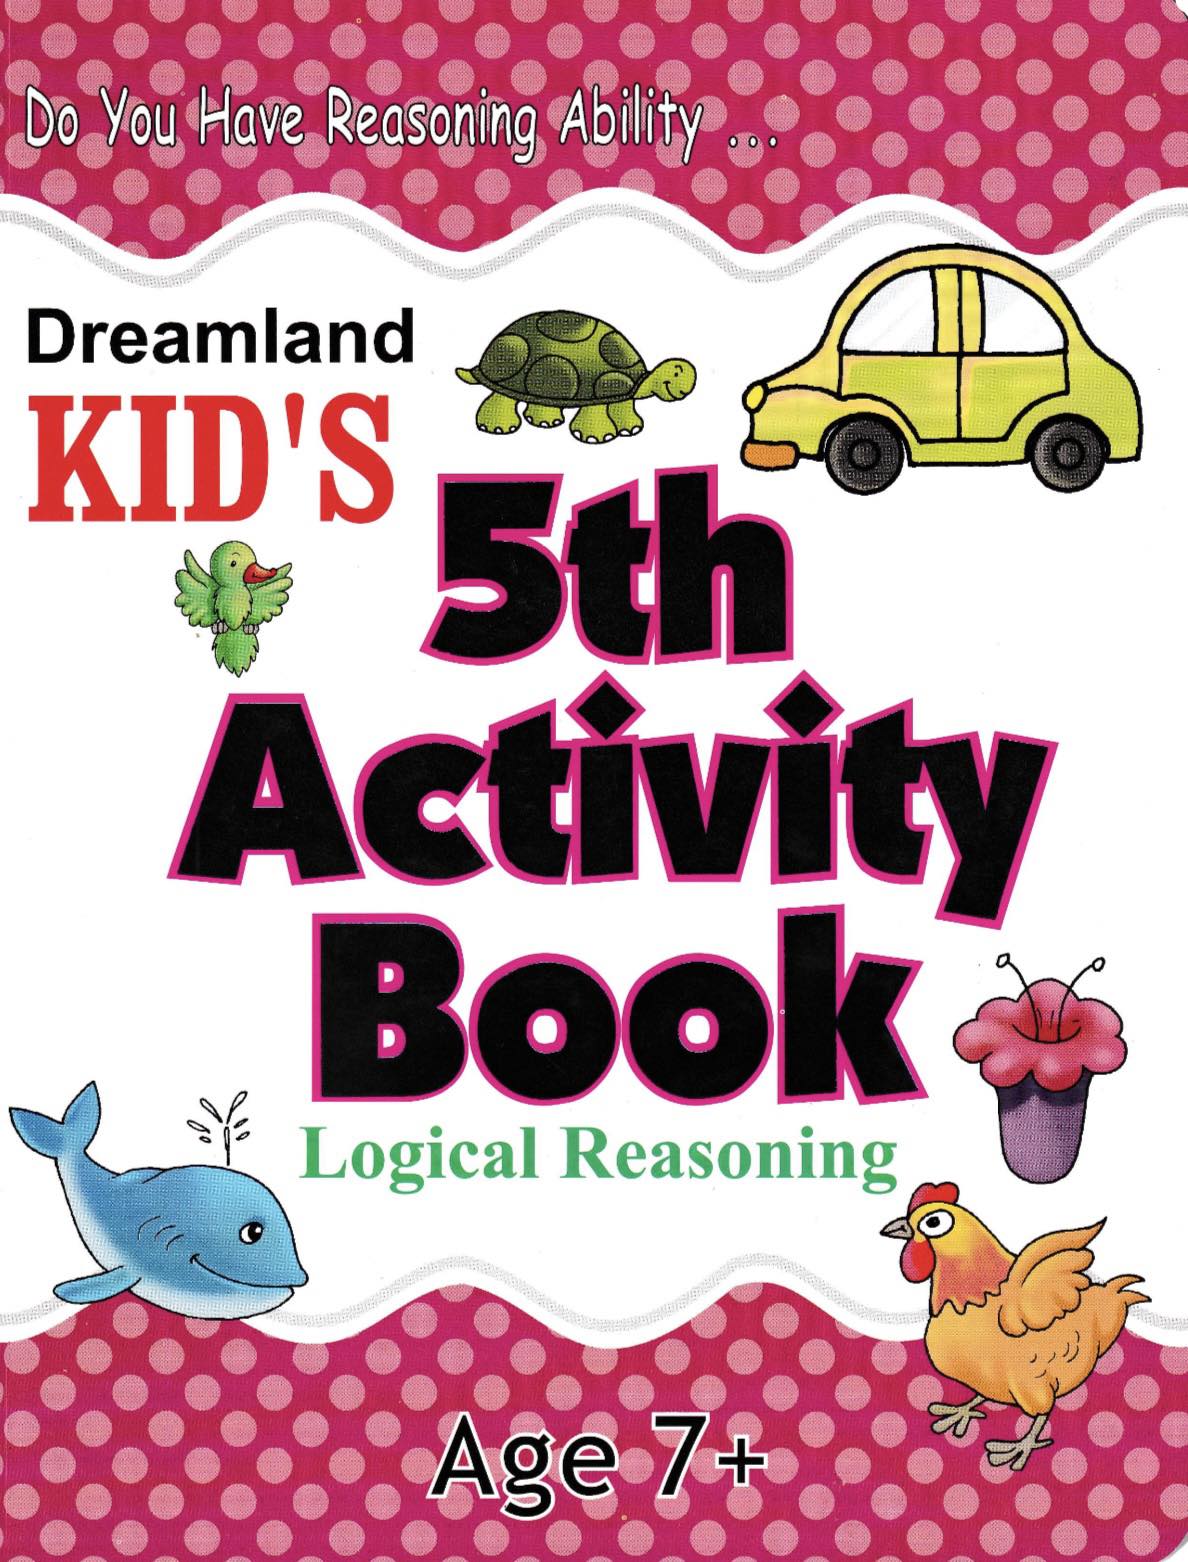 Dreamland Kid's 5th Activity Book for Age 7+